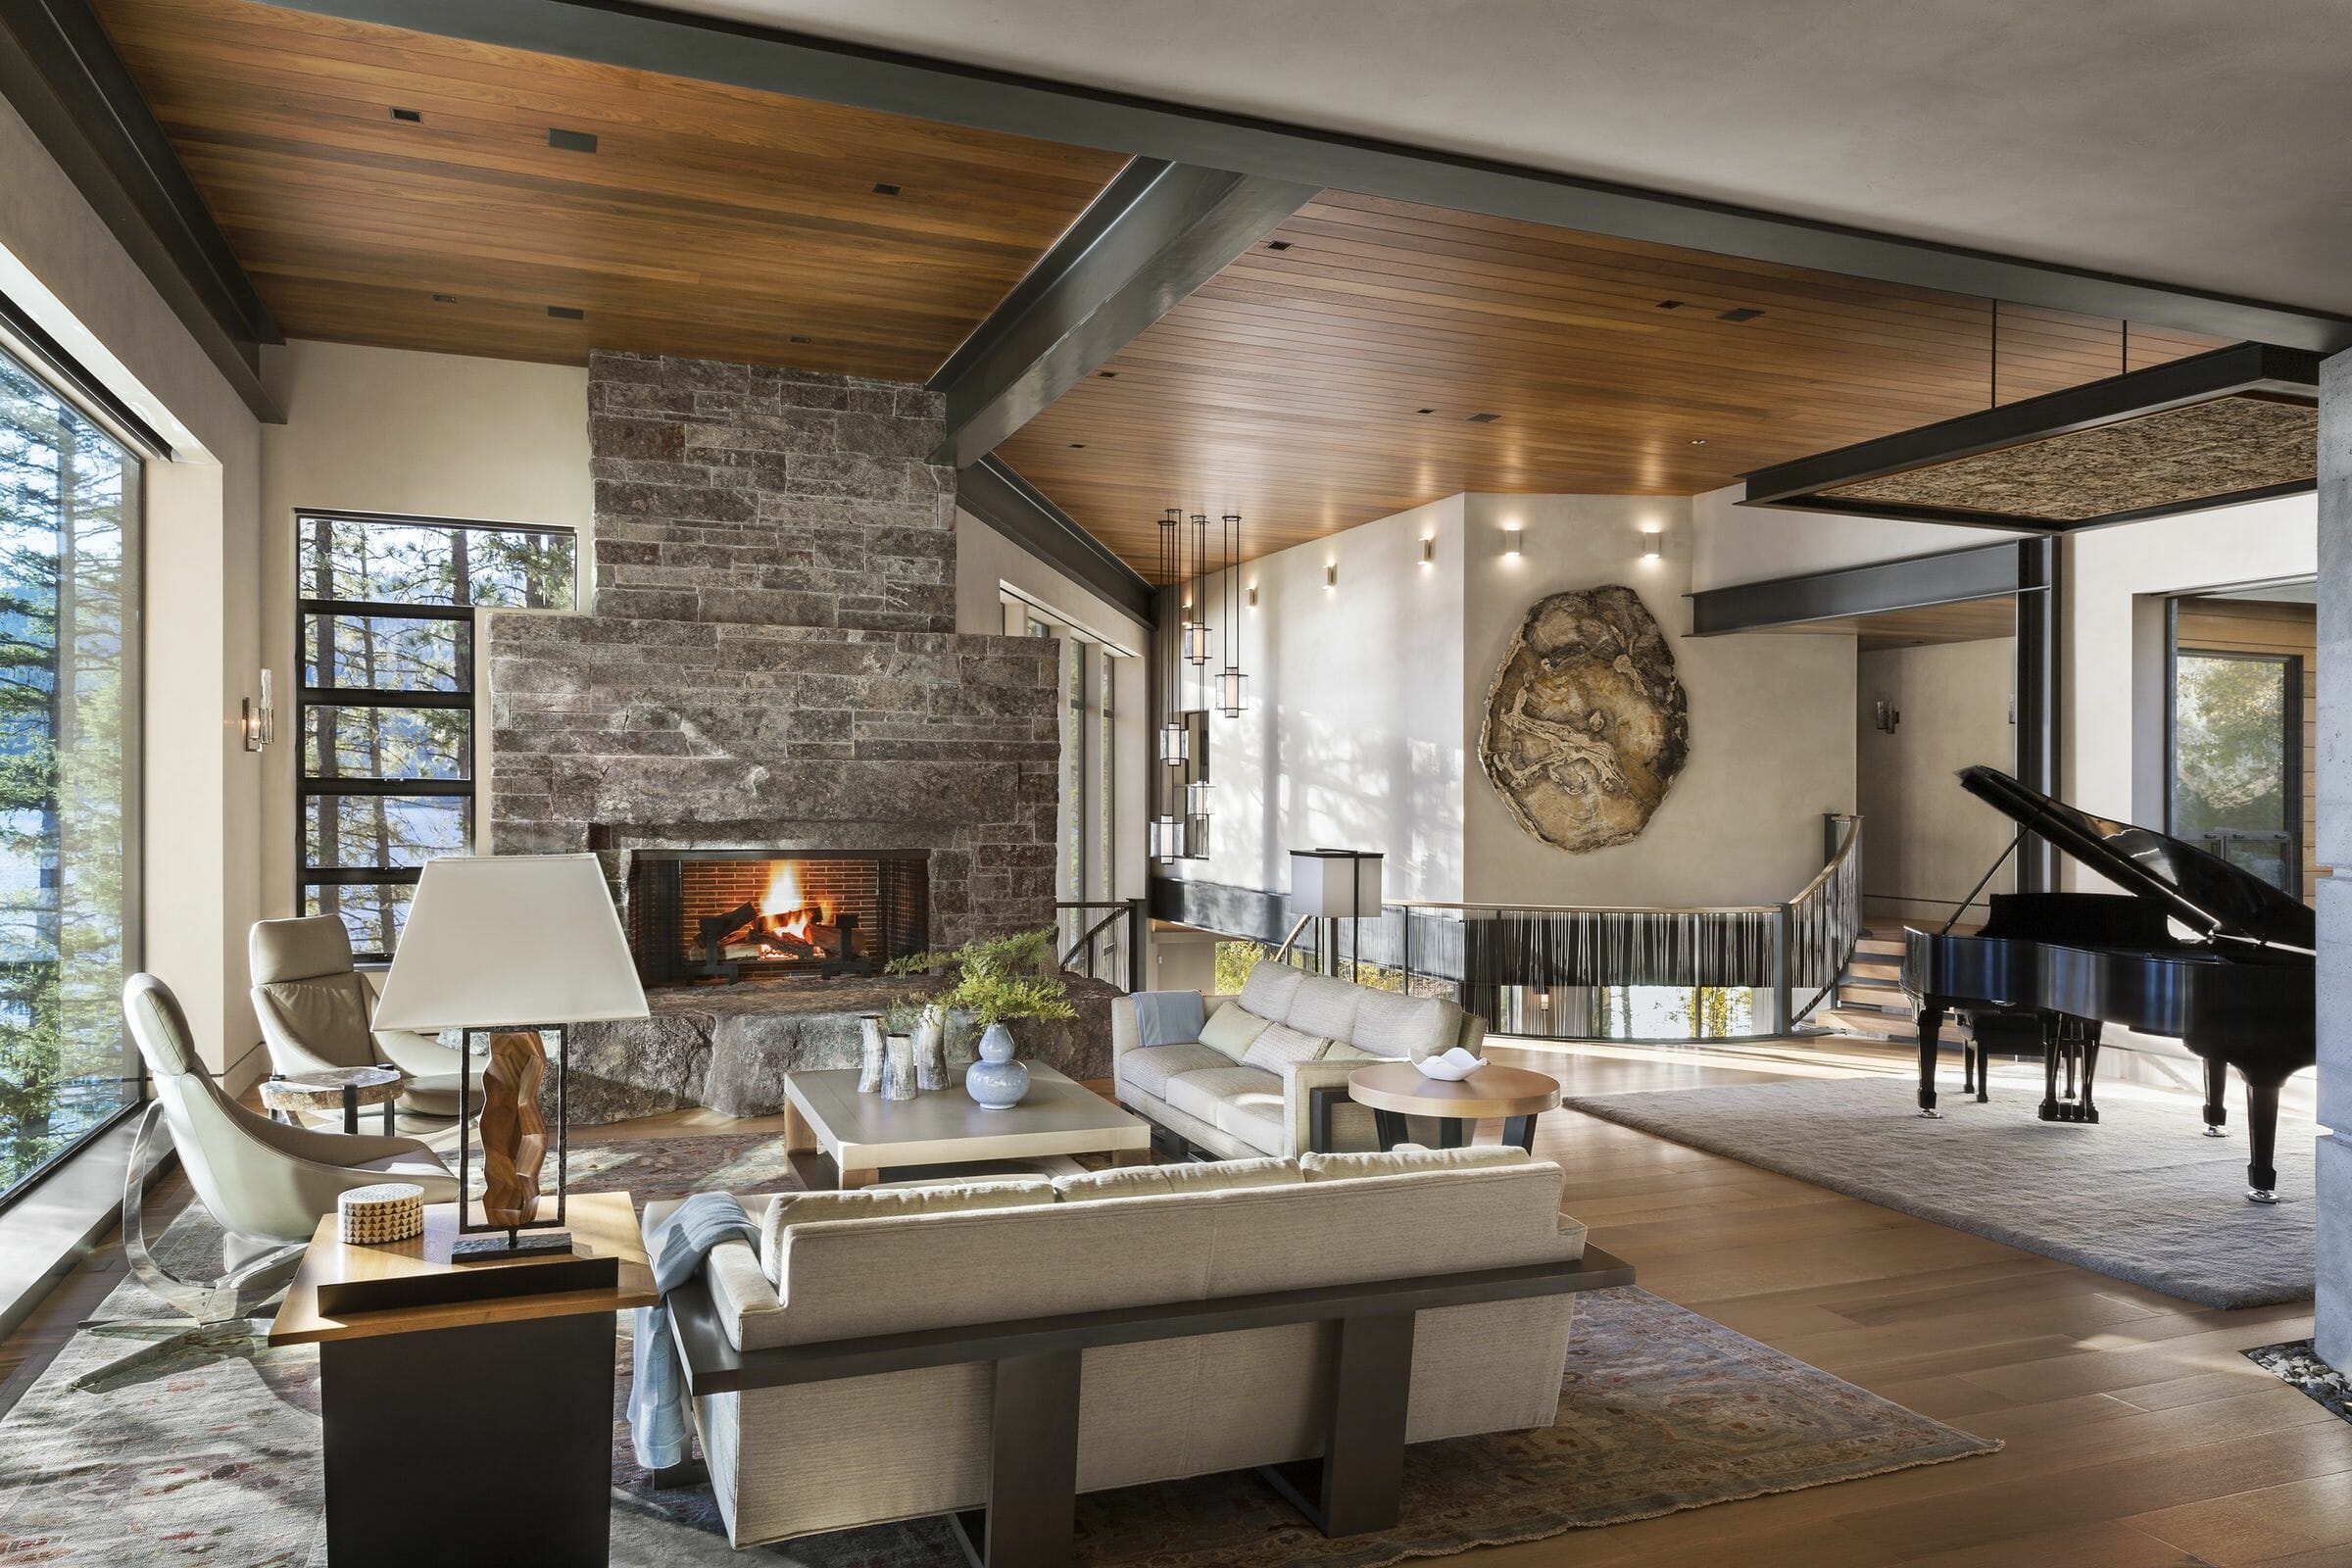 52 Rustic Living Room Ideas for a Warm and Timeless Retreat